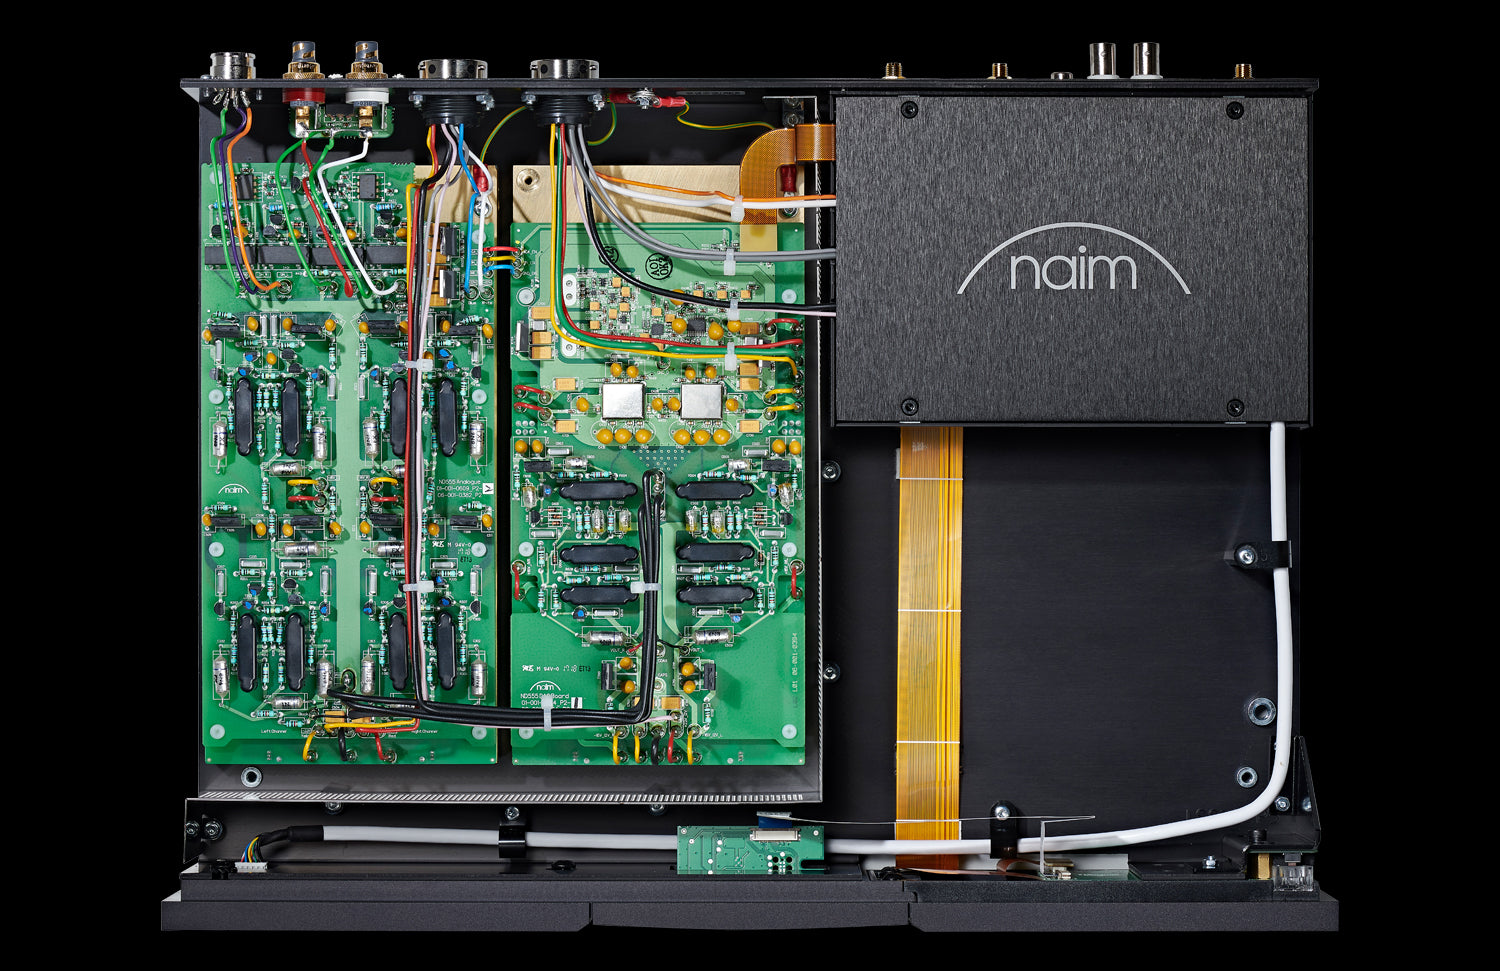 Naim ND555 Network player with 555PS DR Power Supply (floor sample sale) (available to demo)